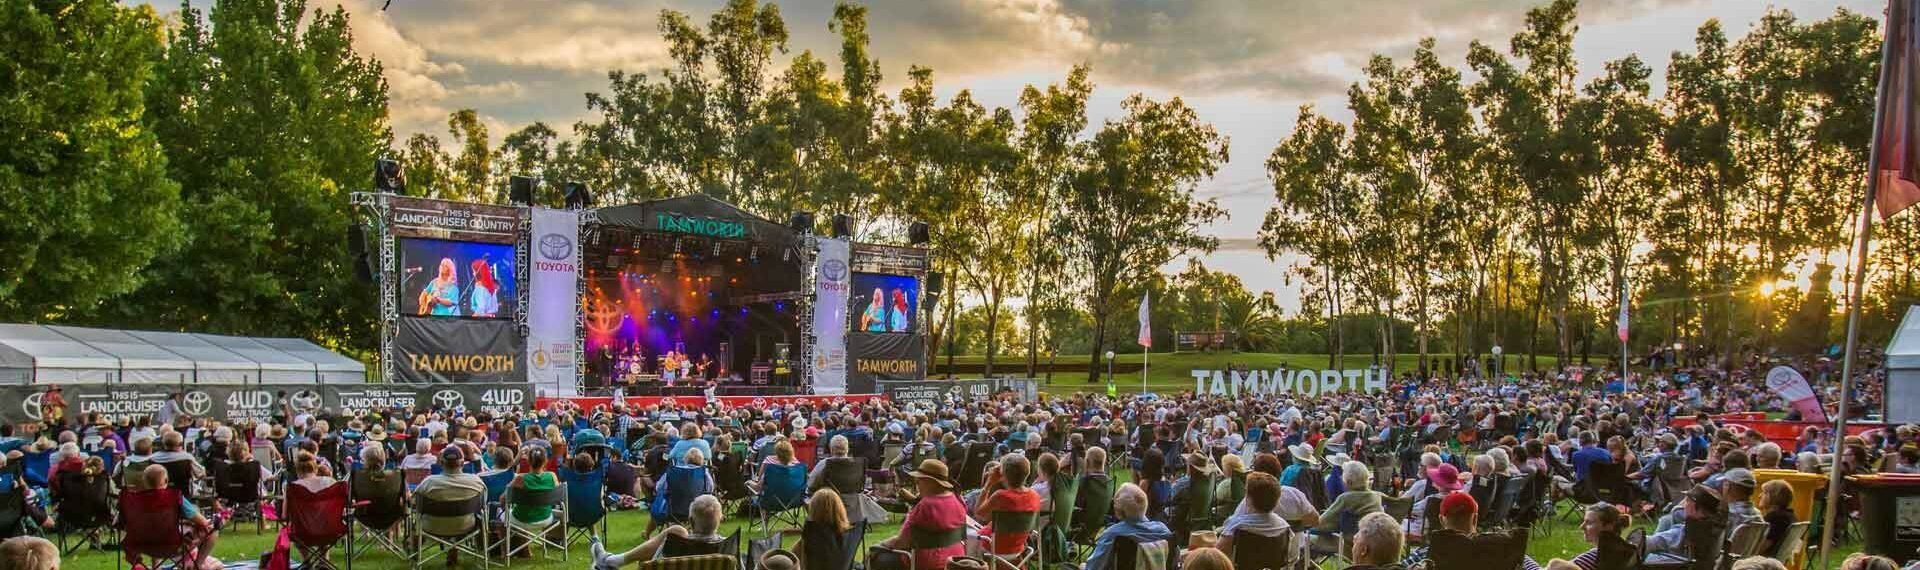 Lifeline Local Charity Partnership announced for Tamworth Country Music Festival in 2023